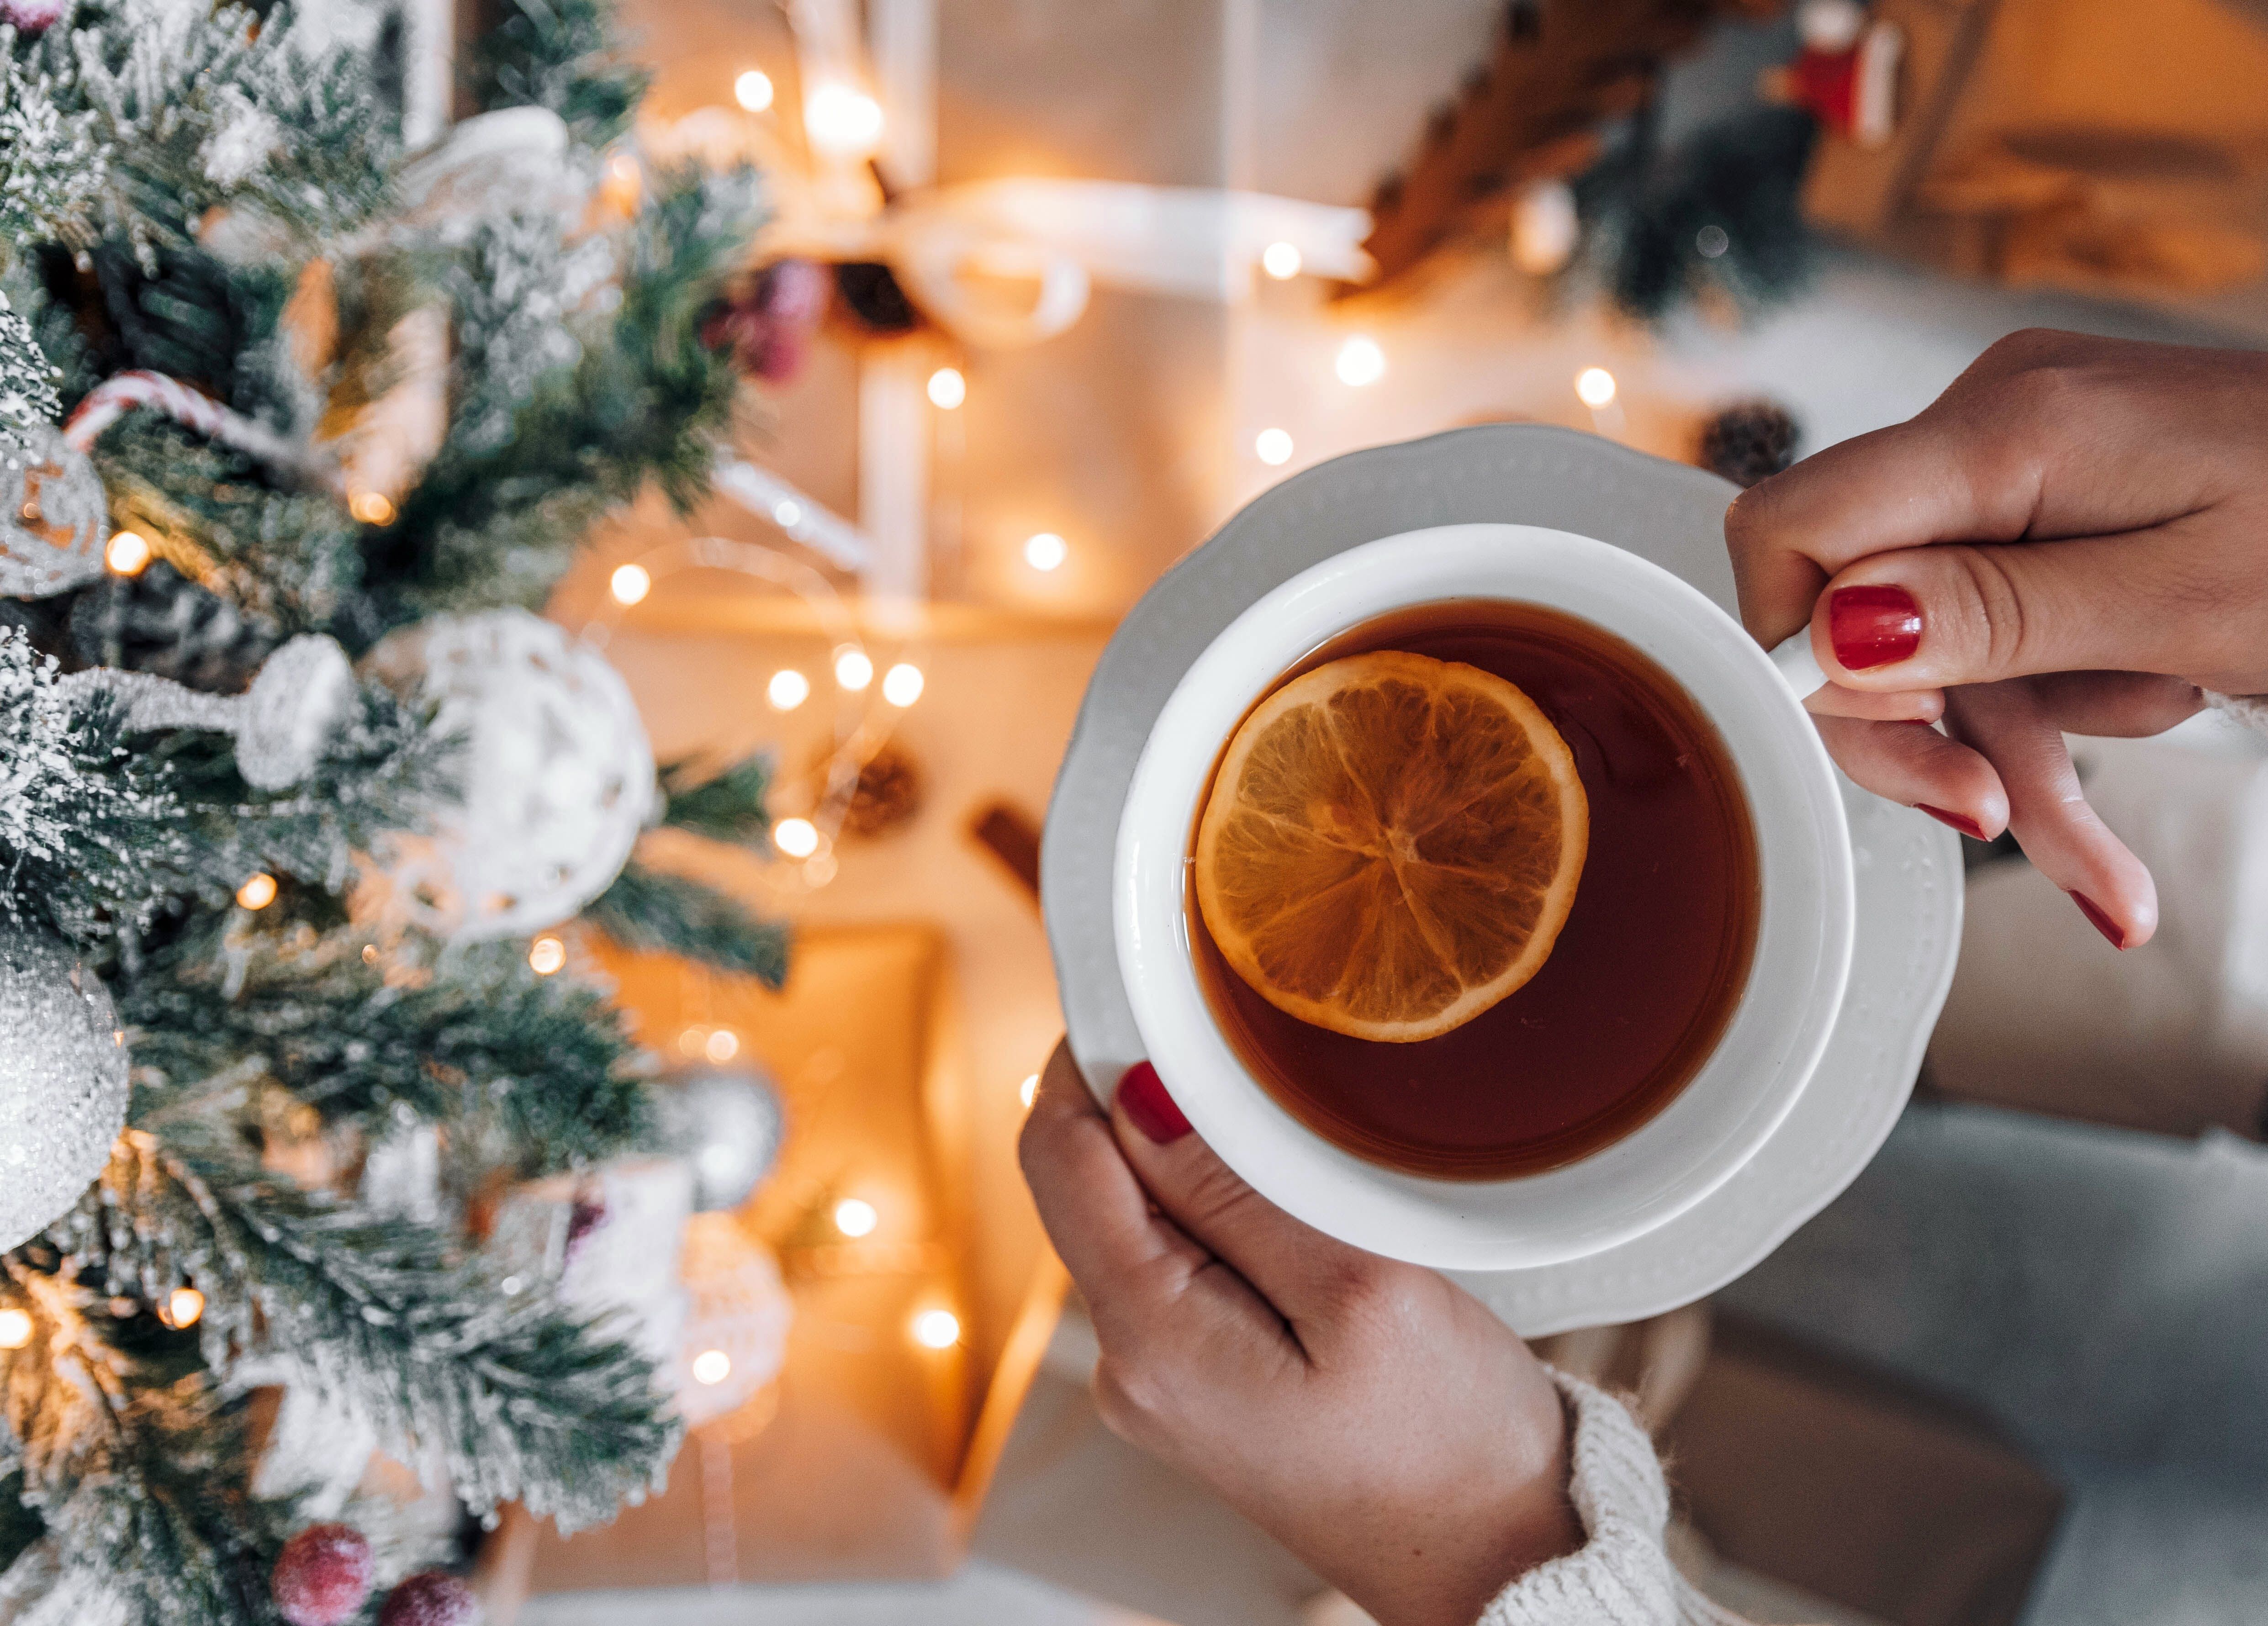 Winding Down for Christmas: Top Tips for a Restful Break